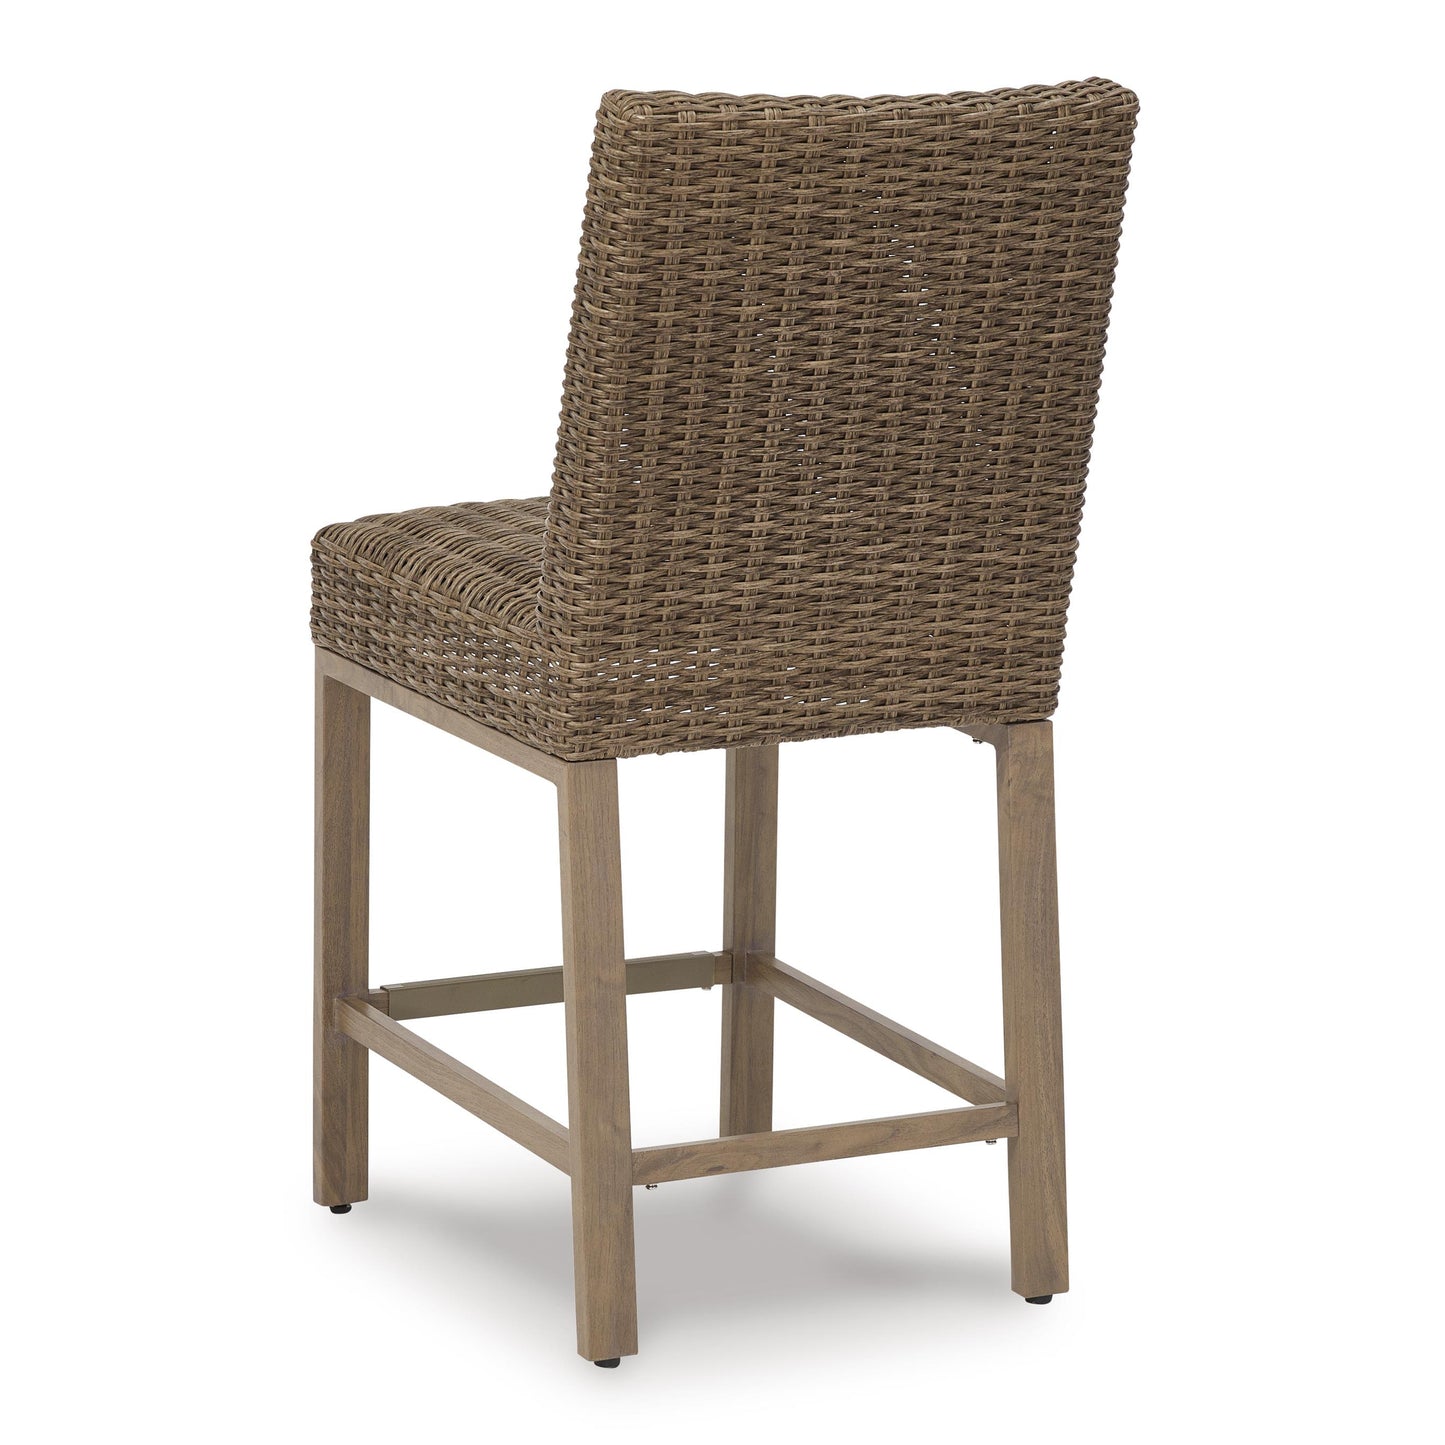 Signature Design by Ashley Outdoor Seating Stools P749-130 IMAGE 4